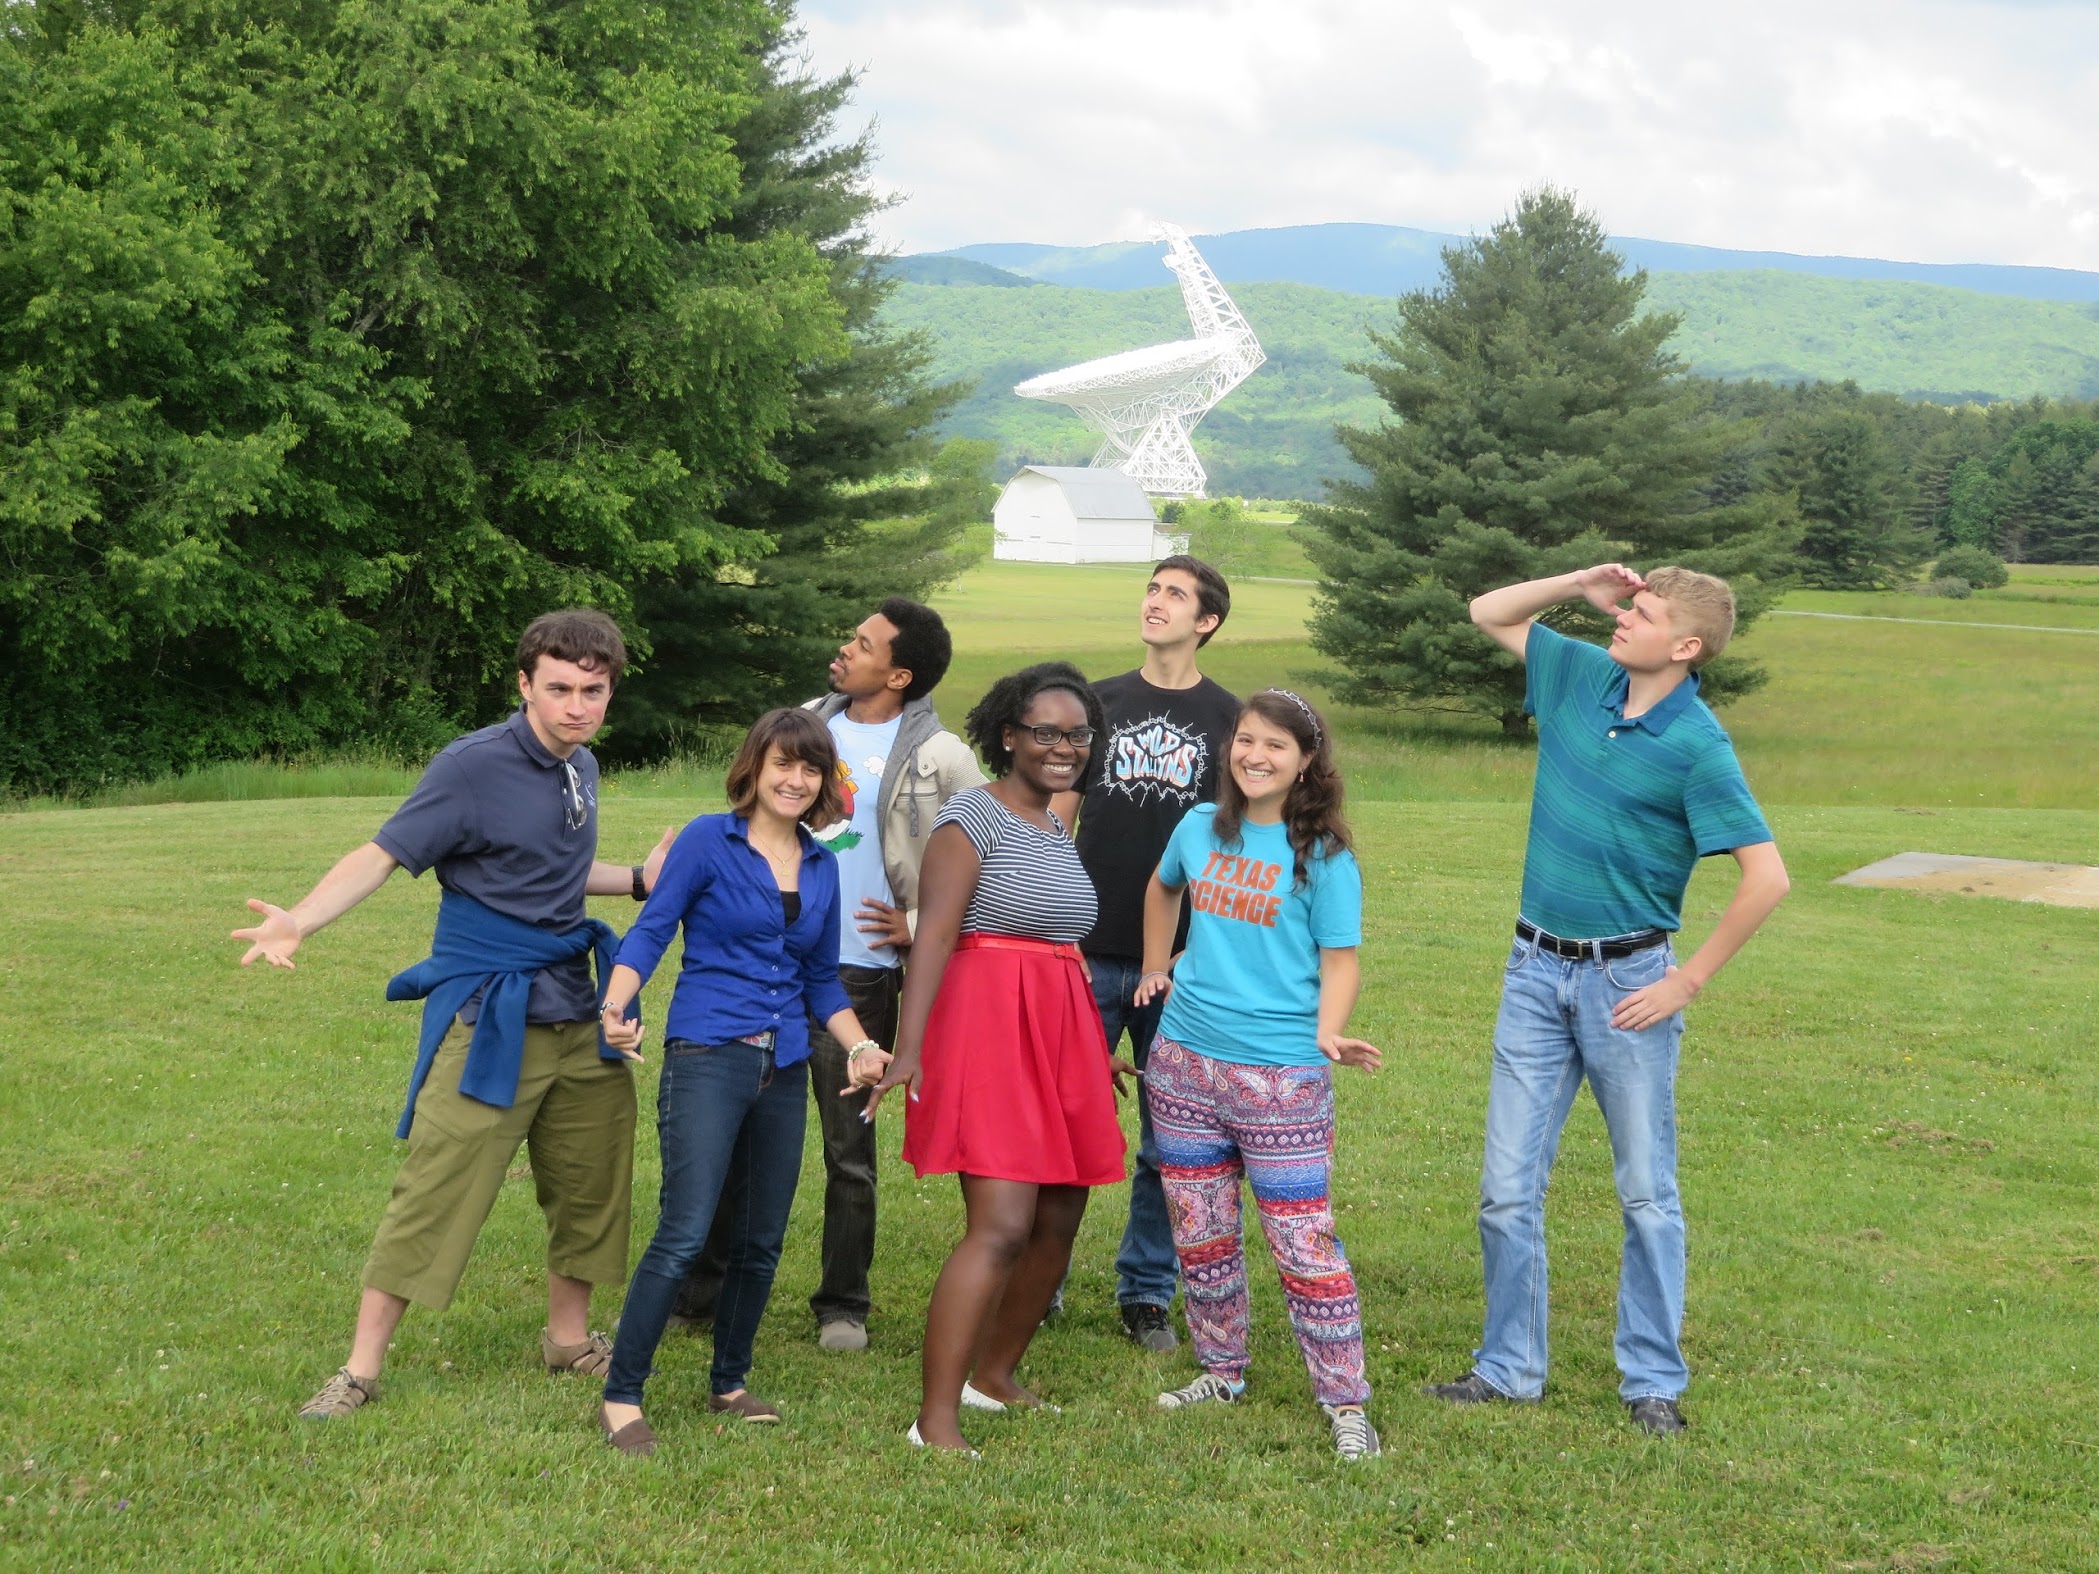 Photo of the 2017 summer interns at NRAO/Charlottesville
										 in front of the GBT